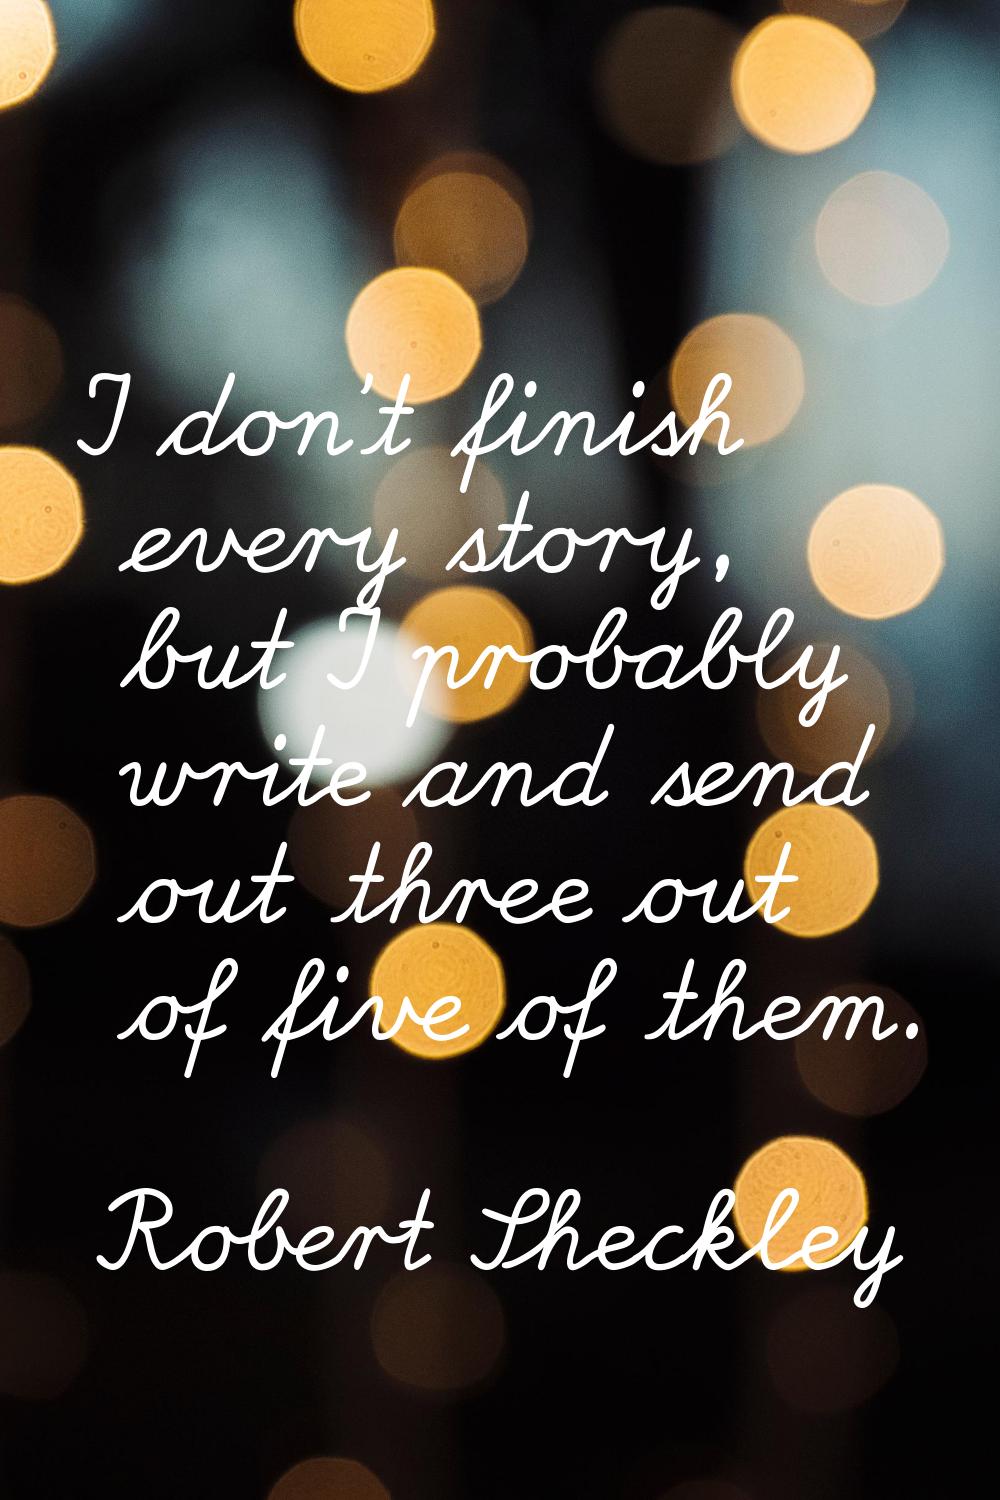 I don't finish every story, but I probably write and send out three out of five of them.